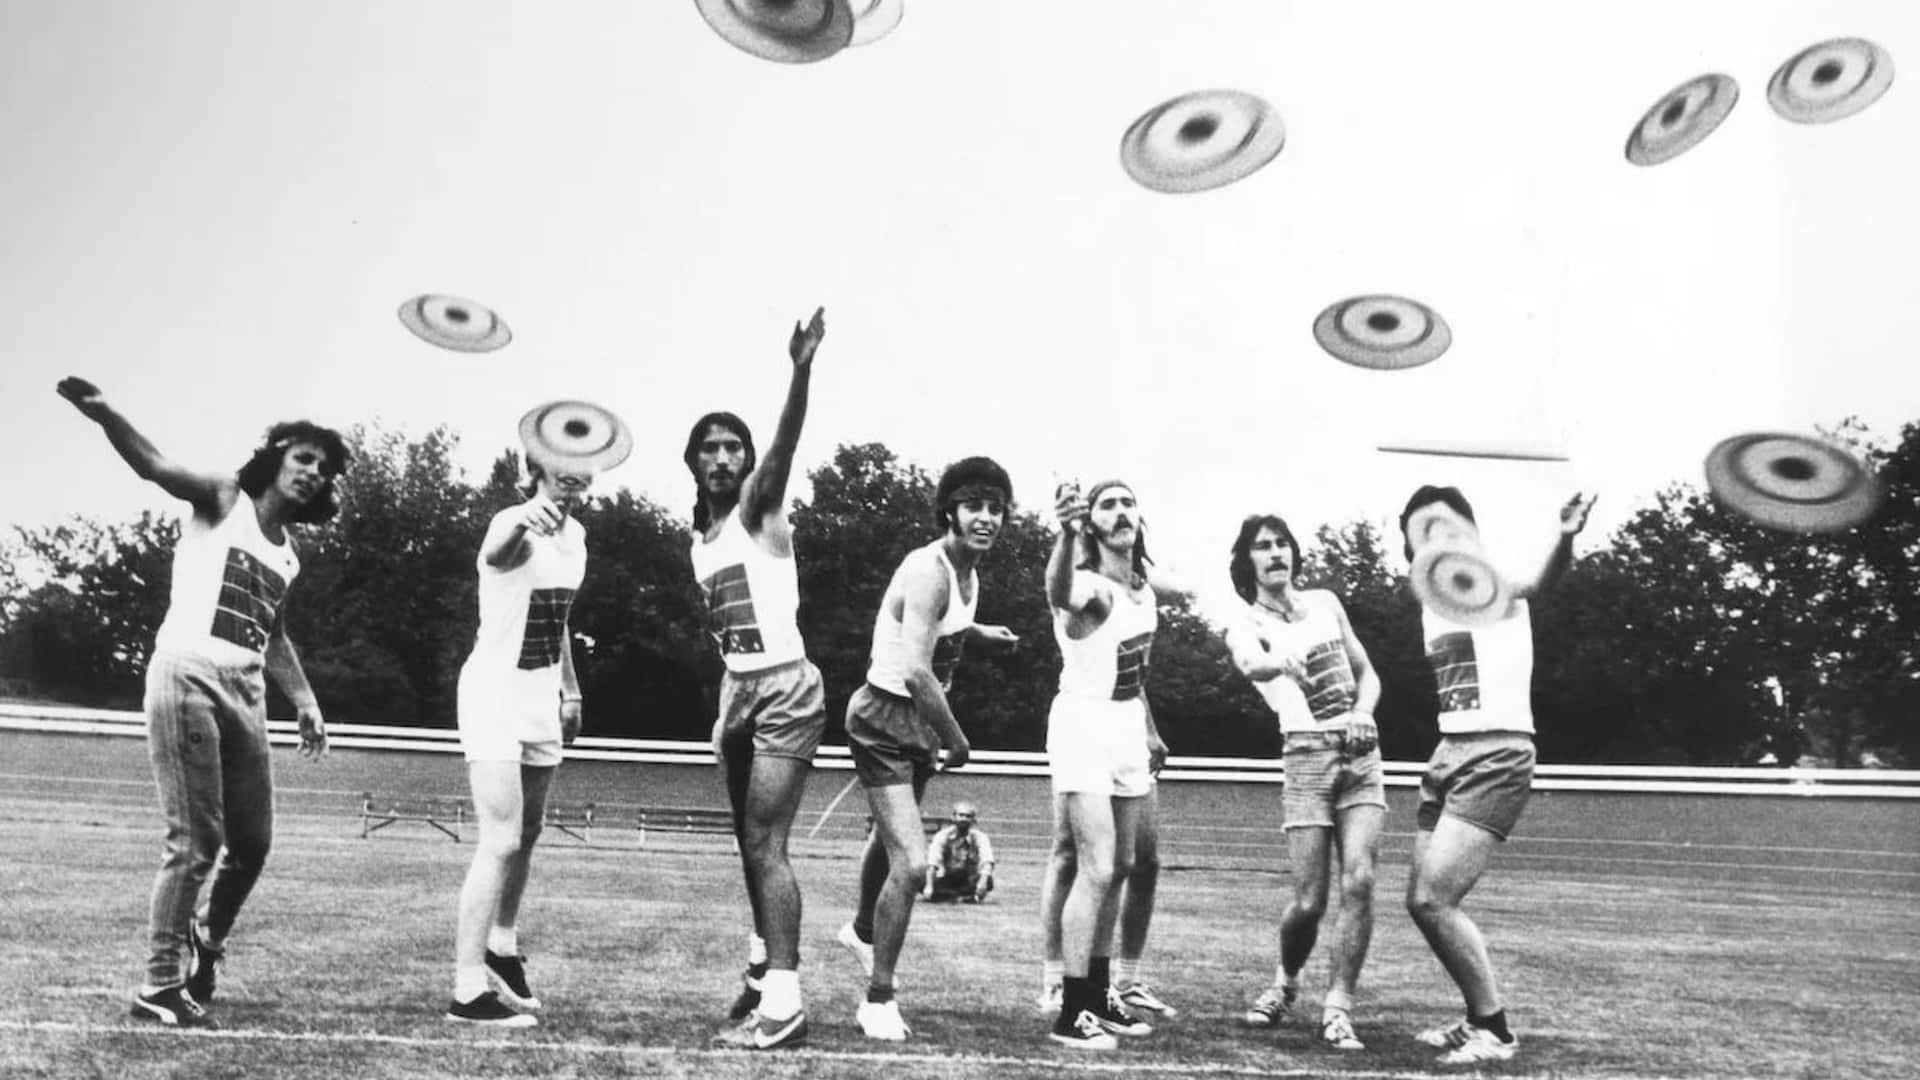 A Group Of People Throwing Frisbees